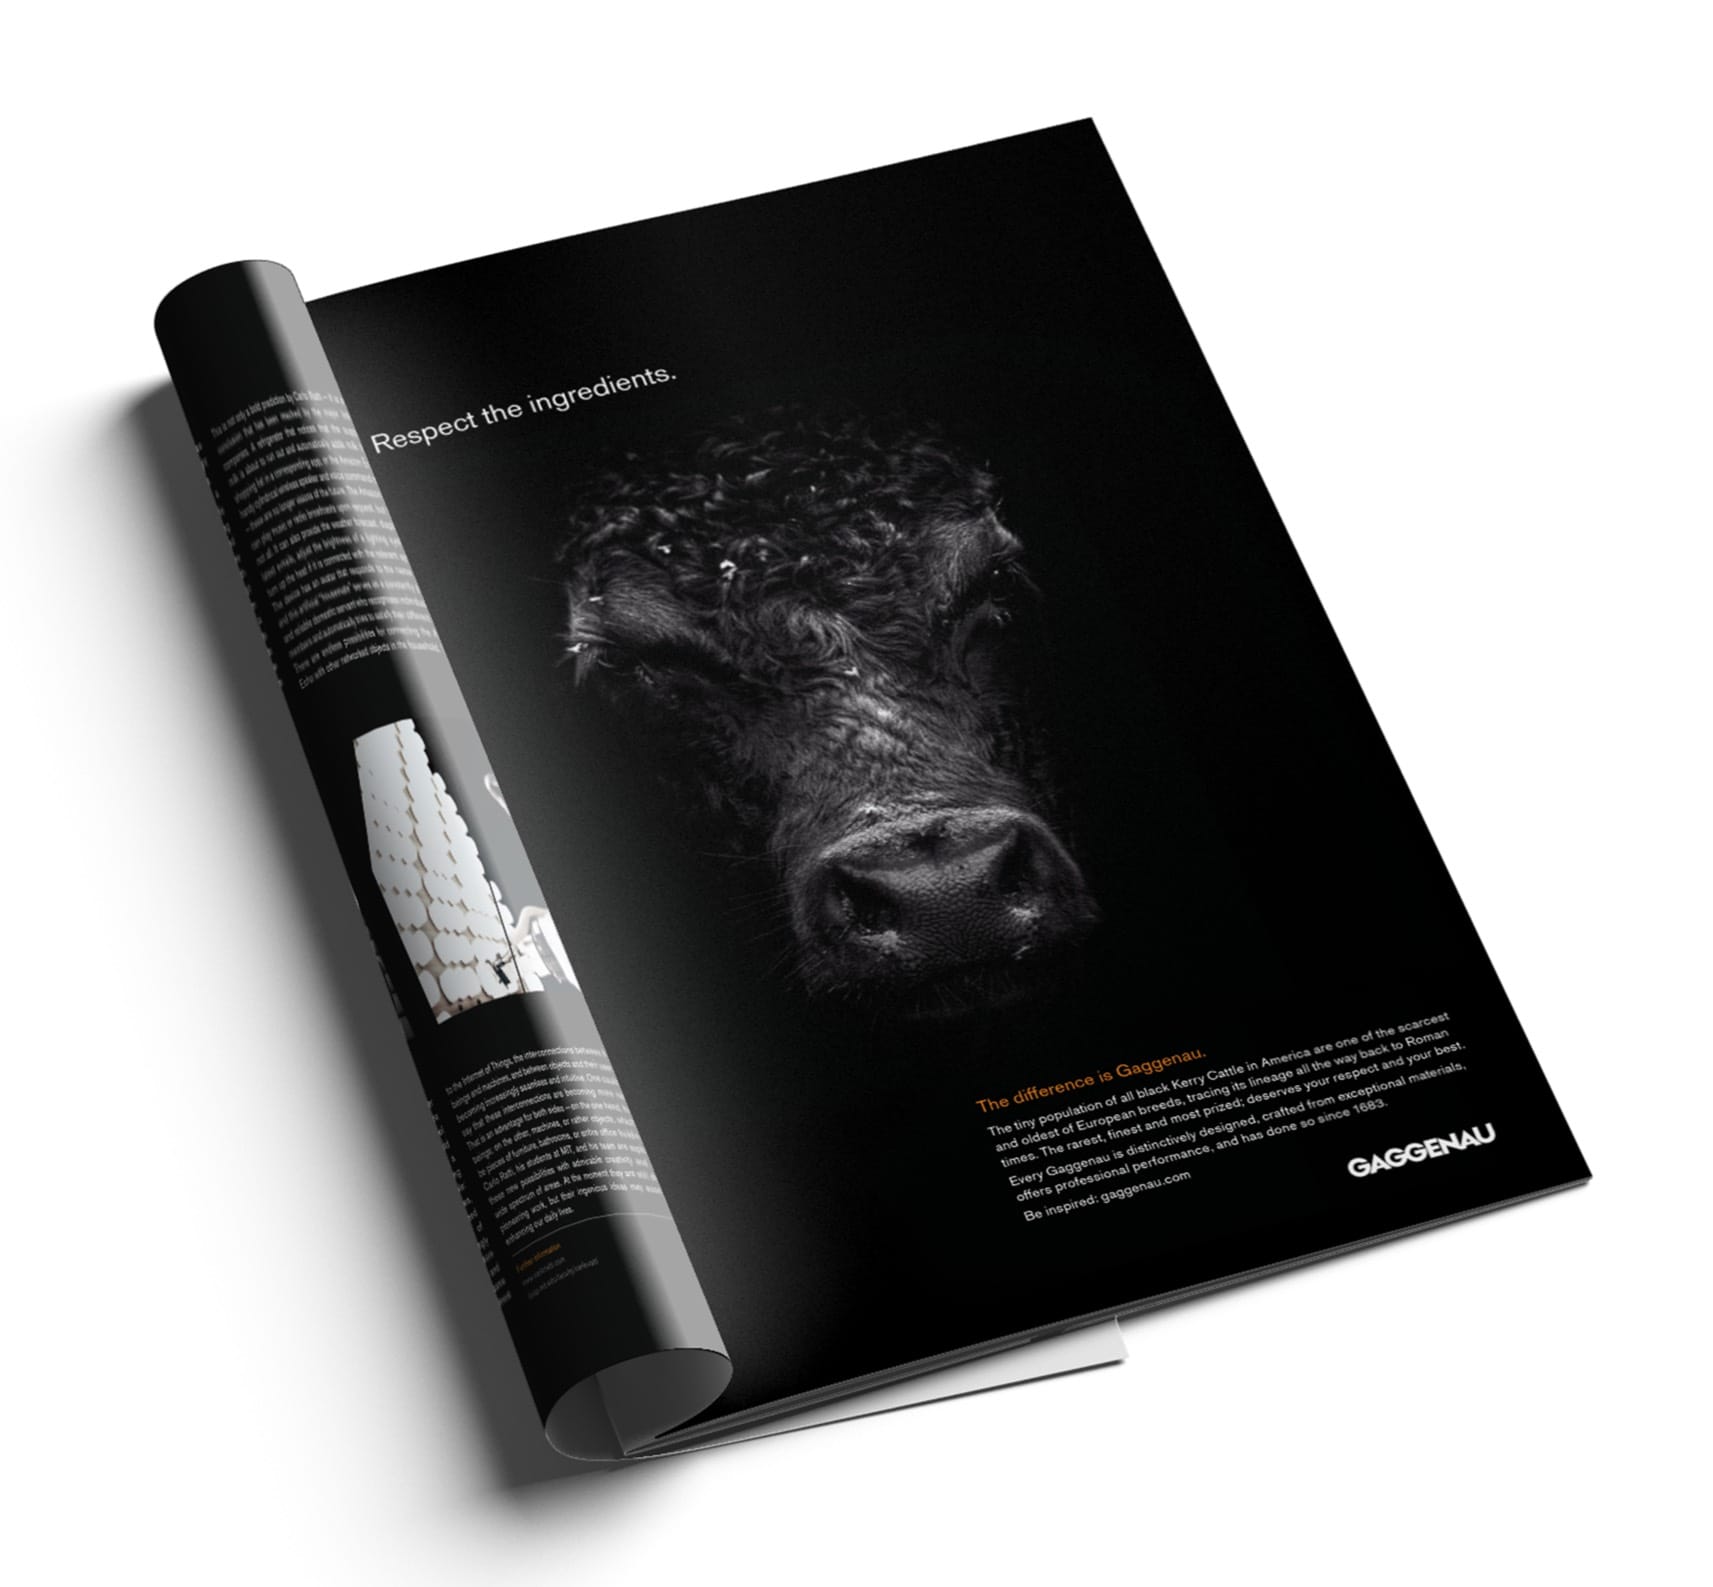 Respectd by Gaggenau advert of cow on black background, 'Respect the ingredients'